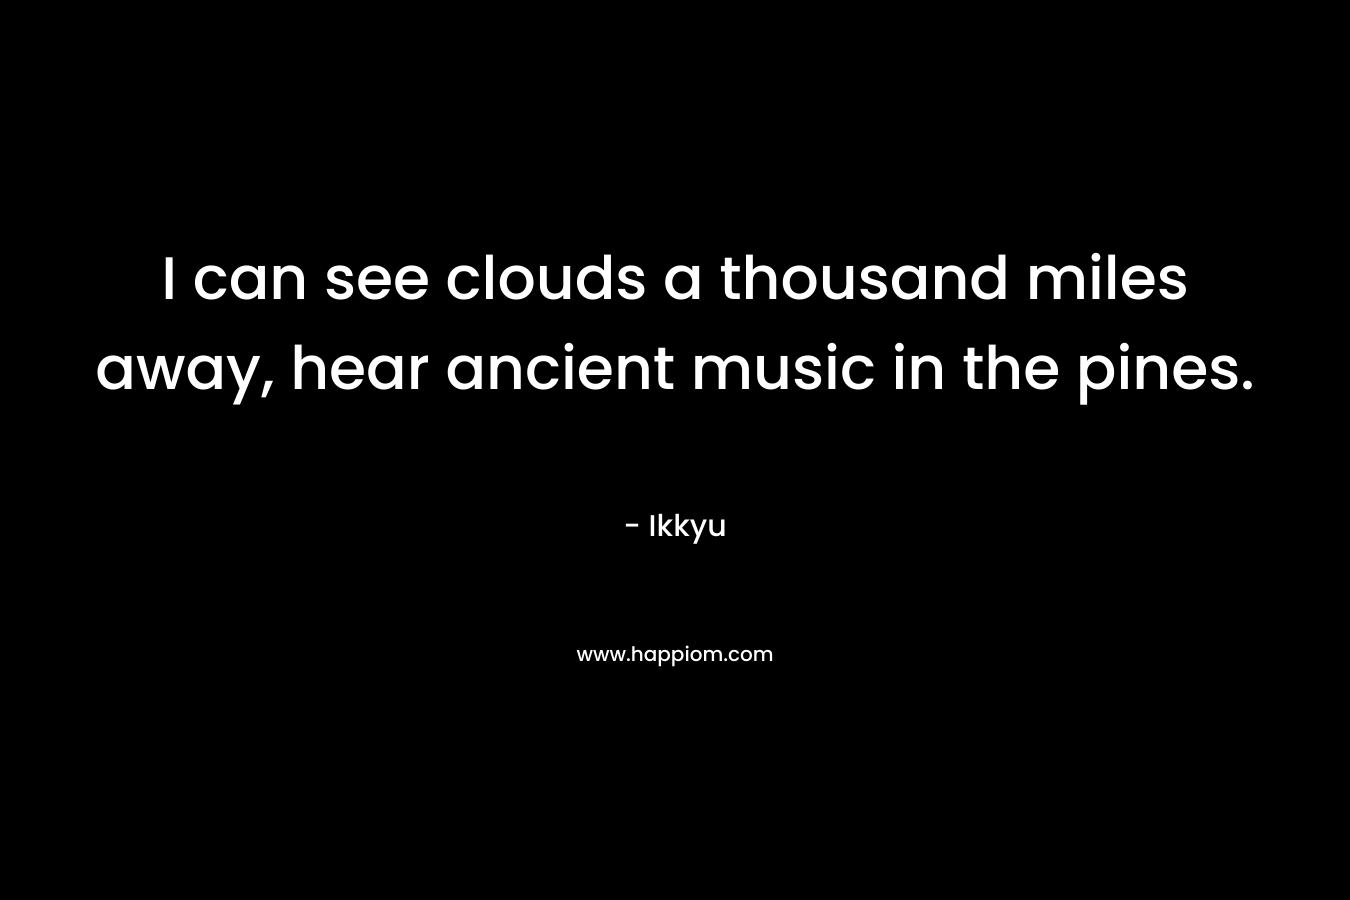 I can see clouds a thousand miles away, hear ancient music in the pines.